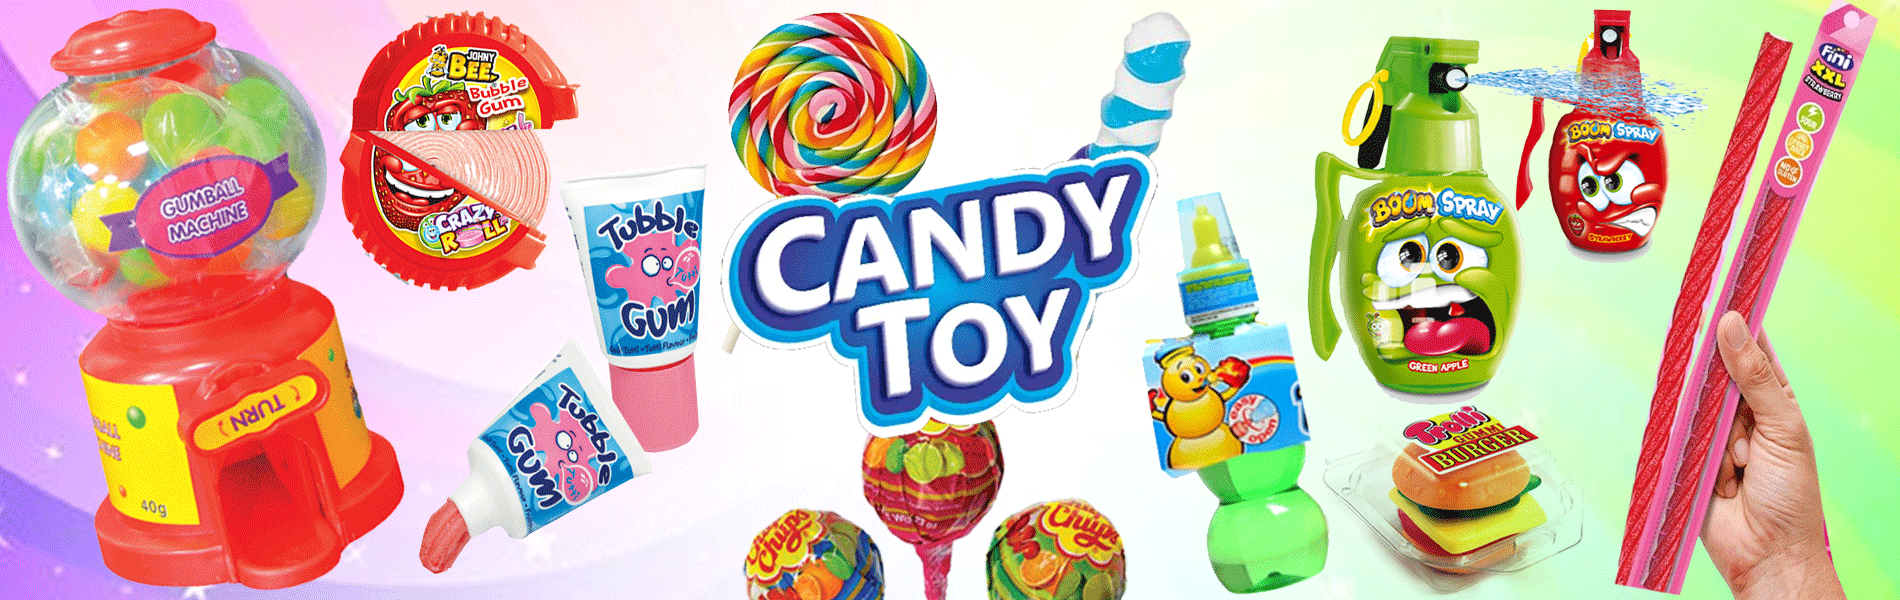 CANDY TOYS 